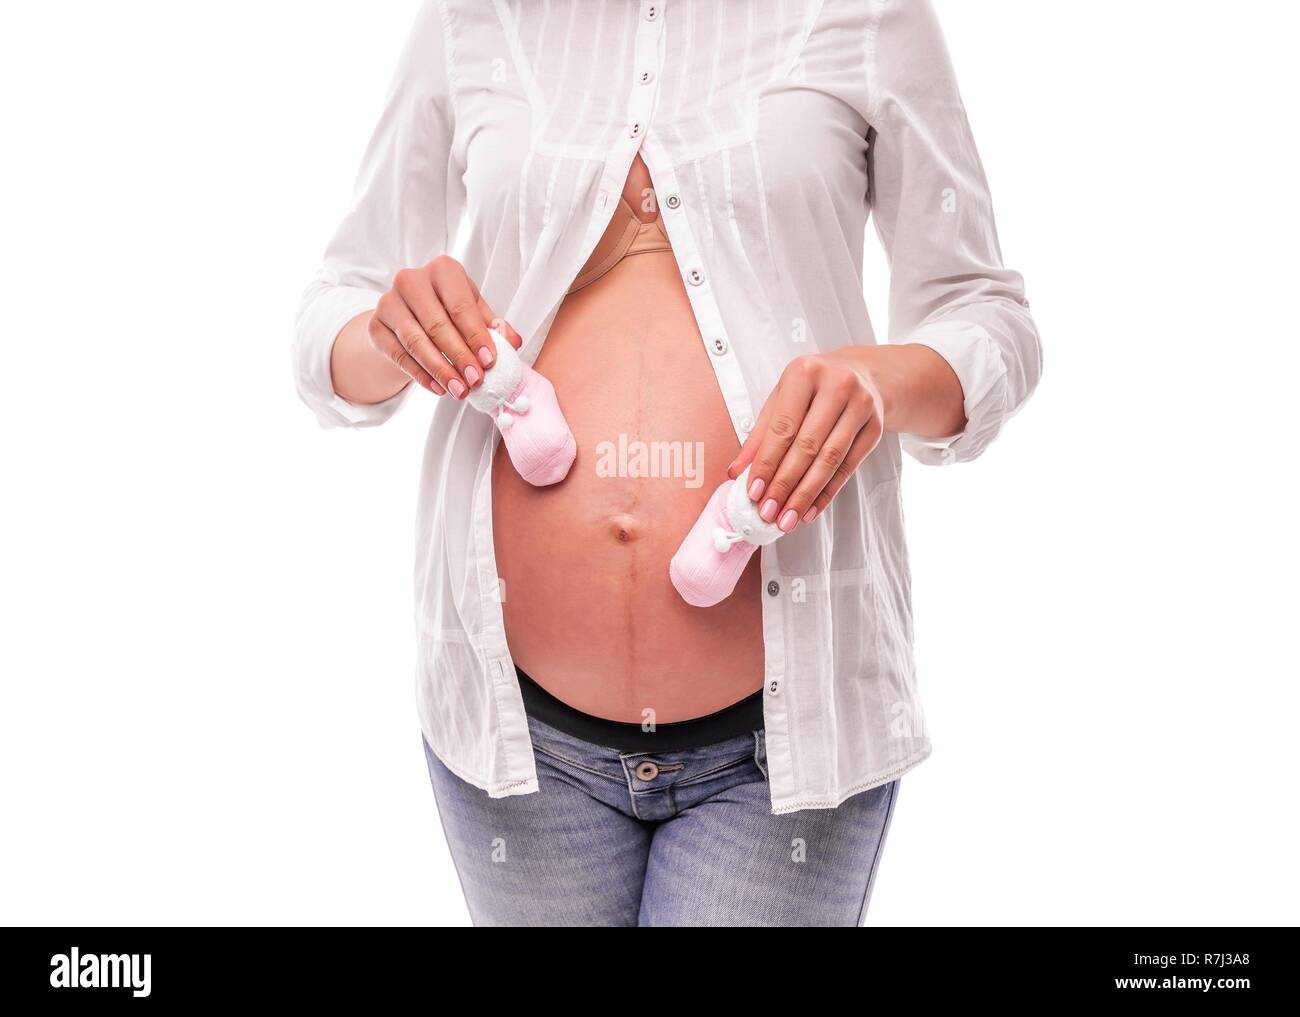 Pregnant woman holding baby socks on her stomach. Stock Photo